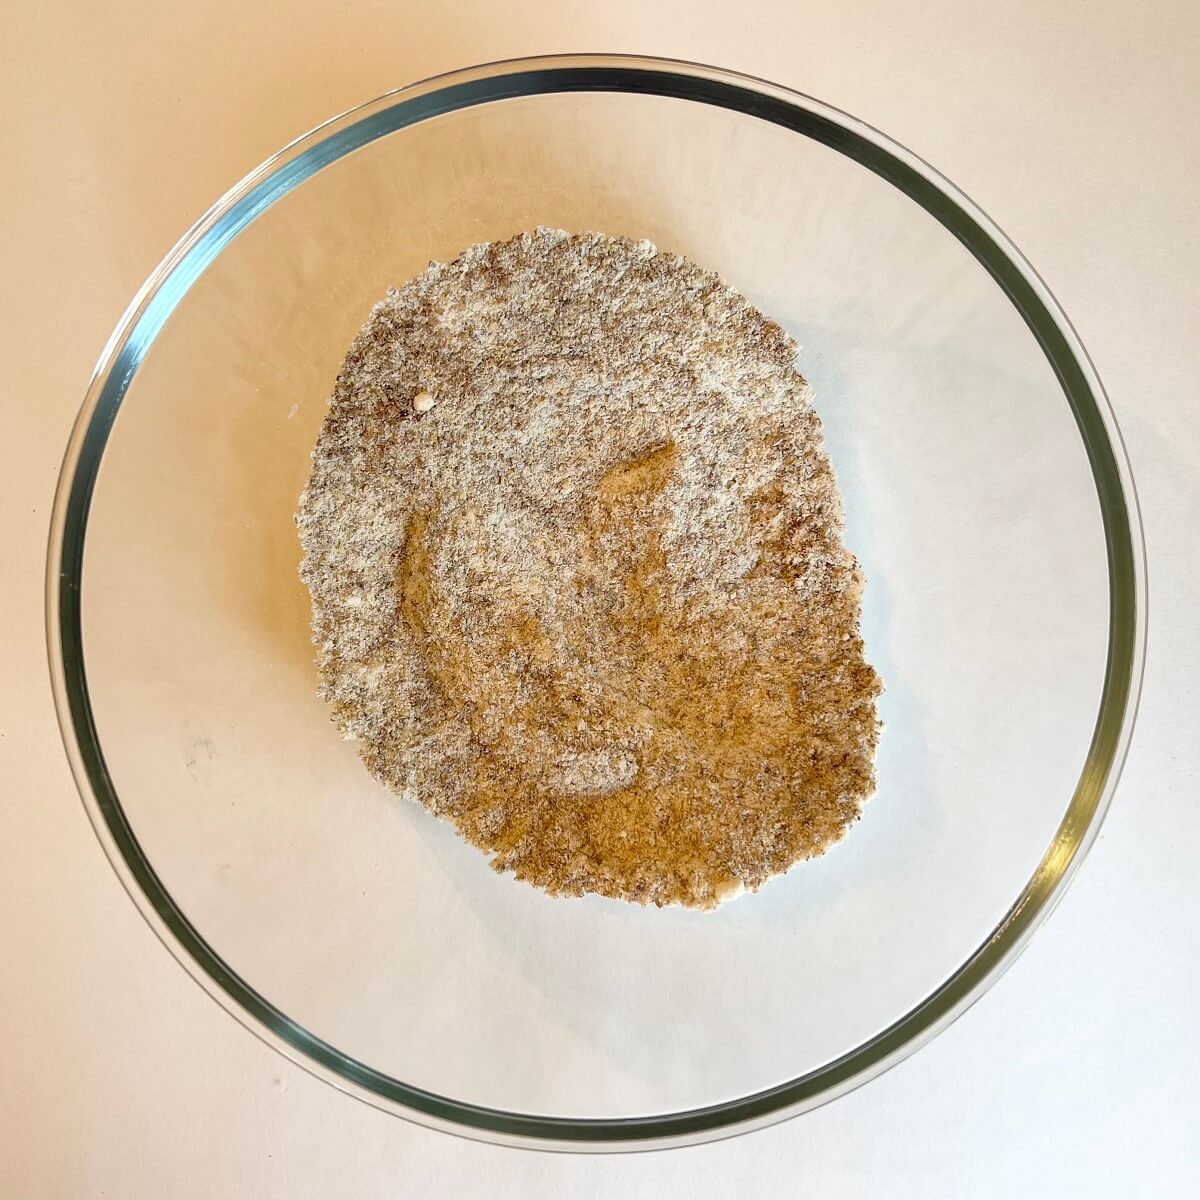 Dry ingredients for donuts in a glass bowl.